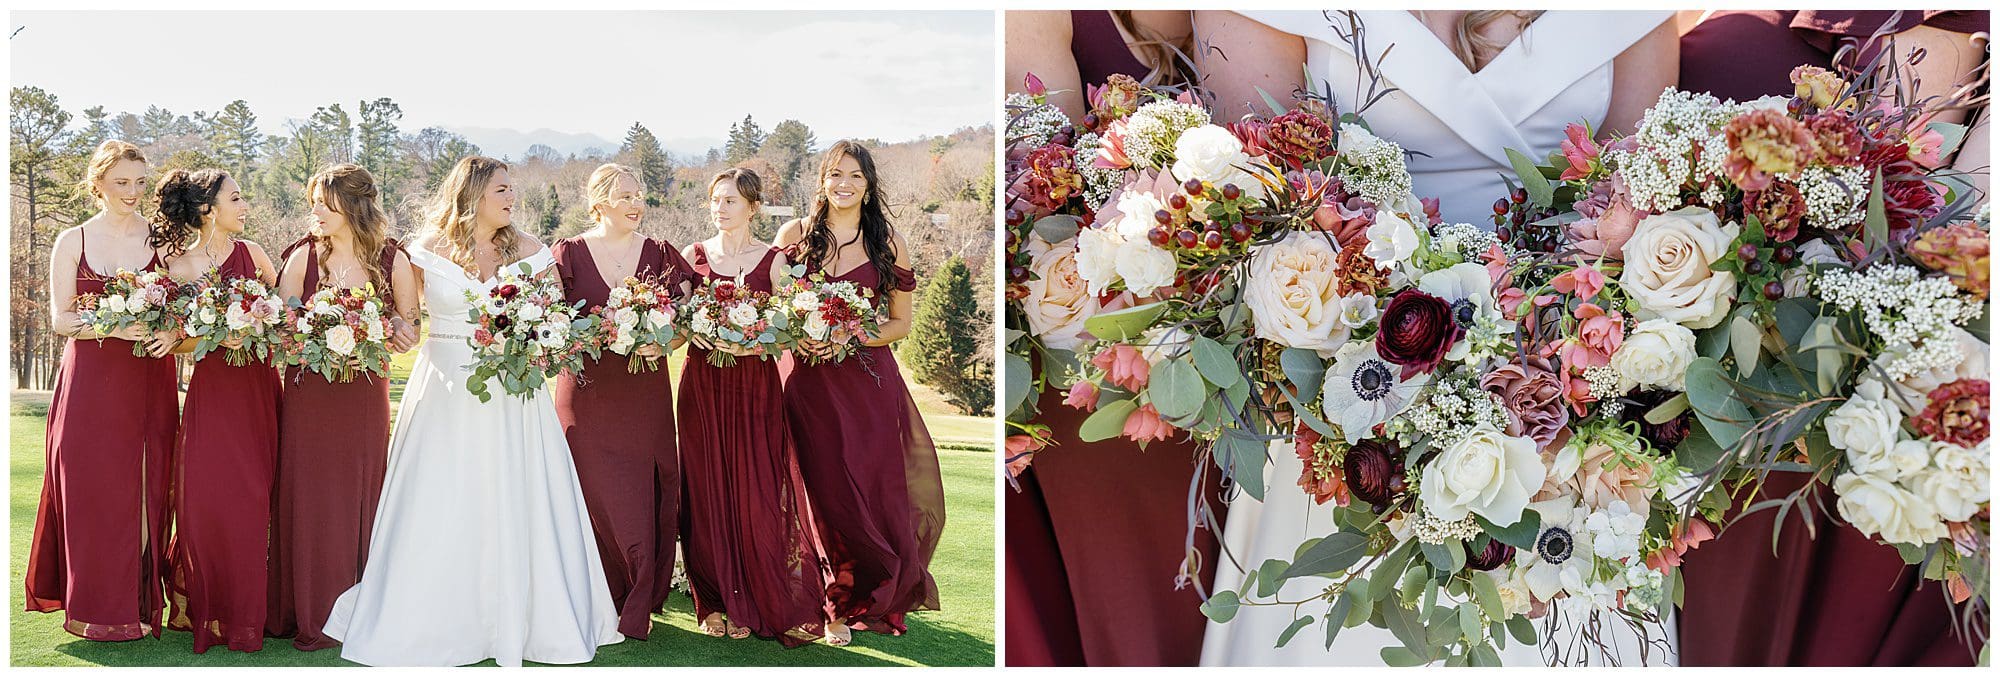 A bride and her bridesmaids in burgundy dresses.